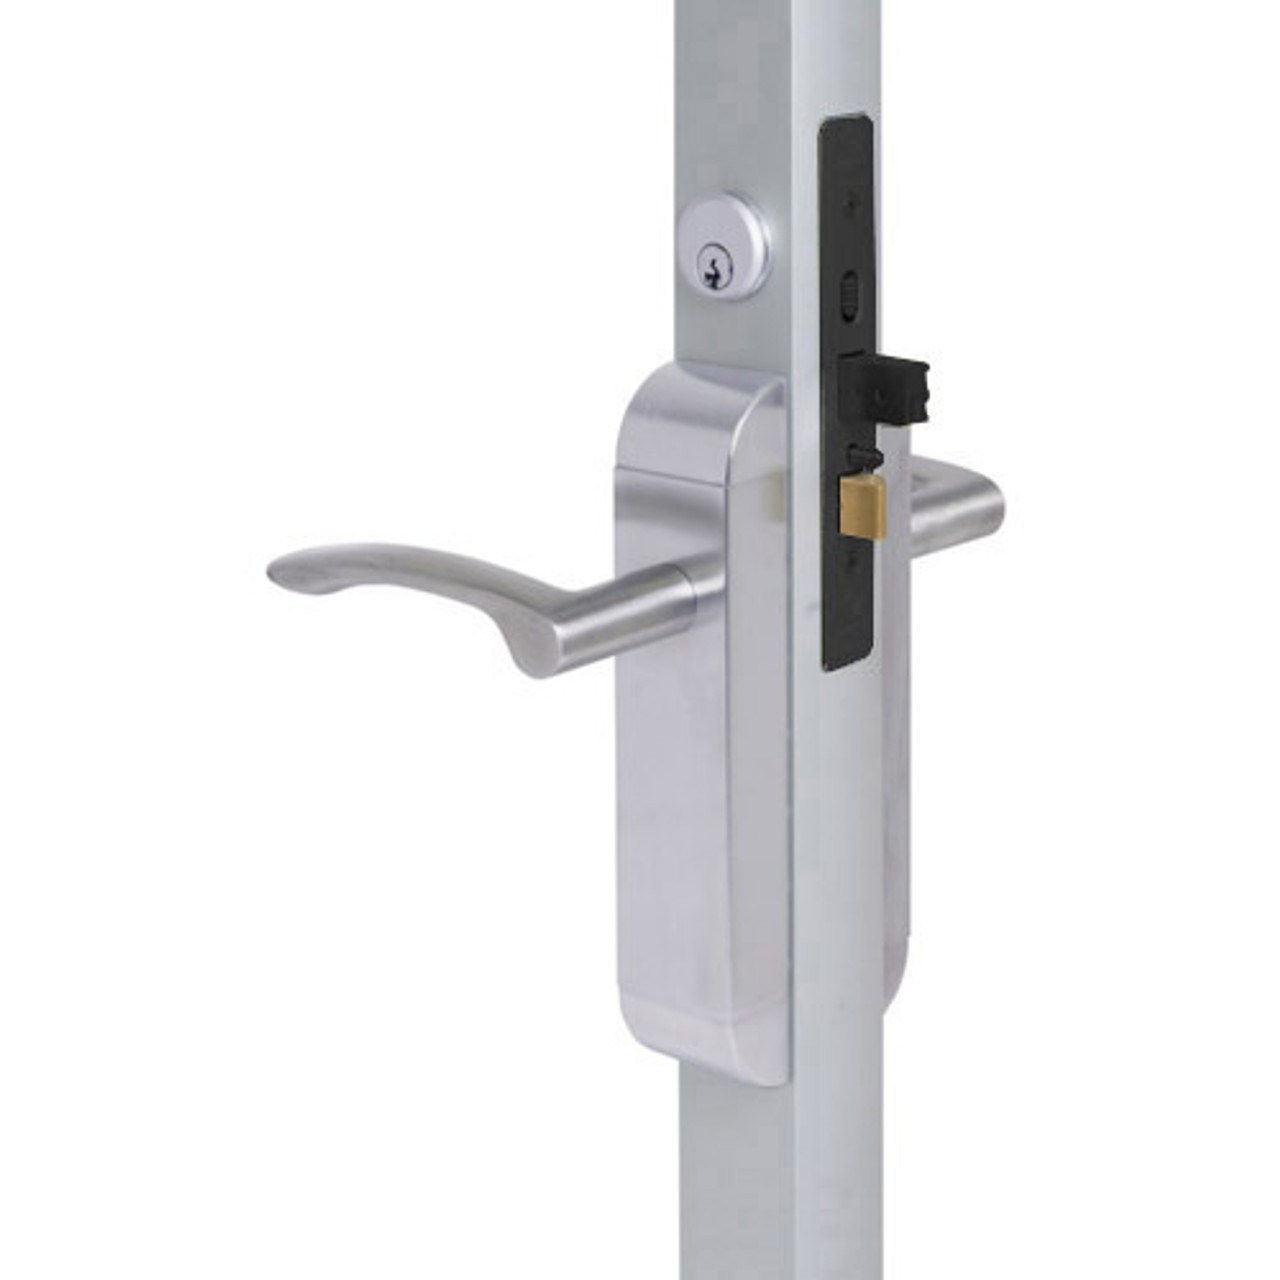 2190-313-203-32 Adams Rite Dual Force Interconnected 2190 series Deadlock/Deadlatch in Bright Stainless